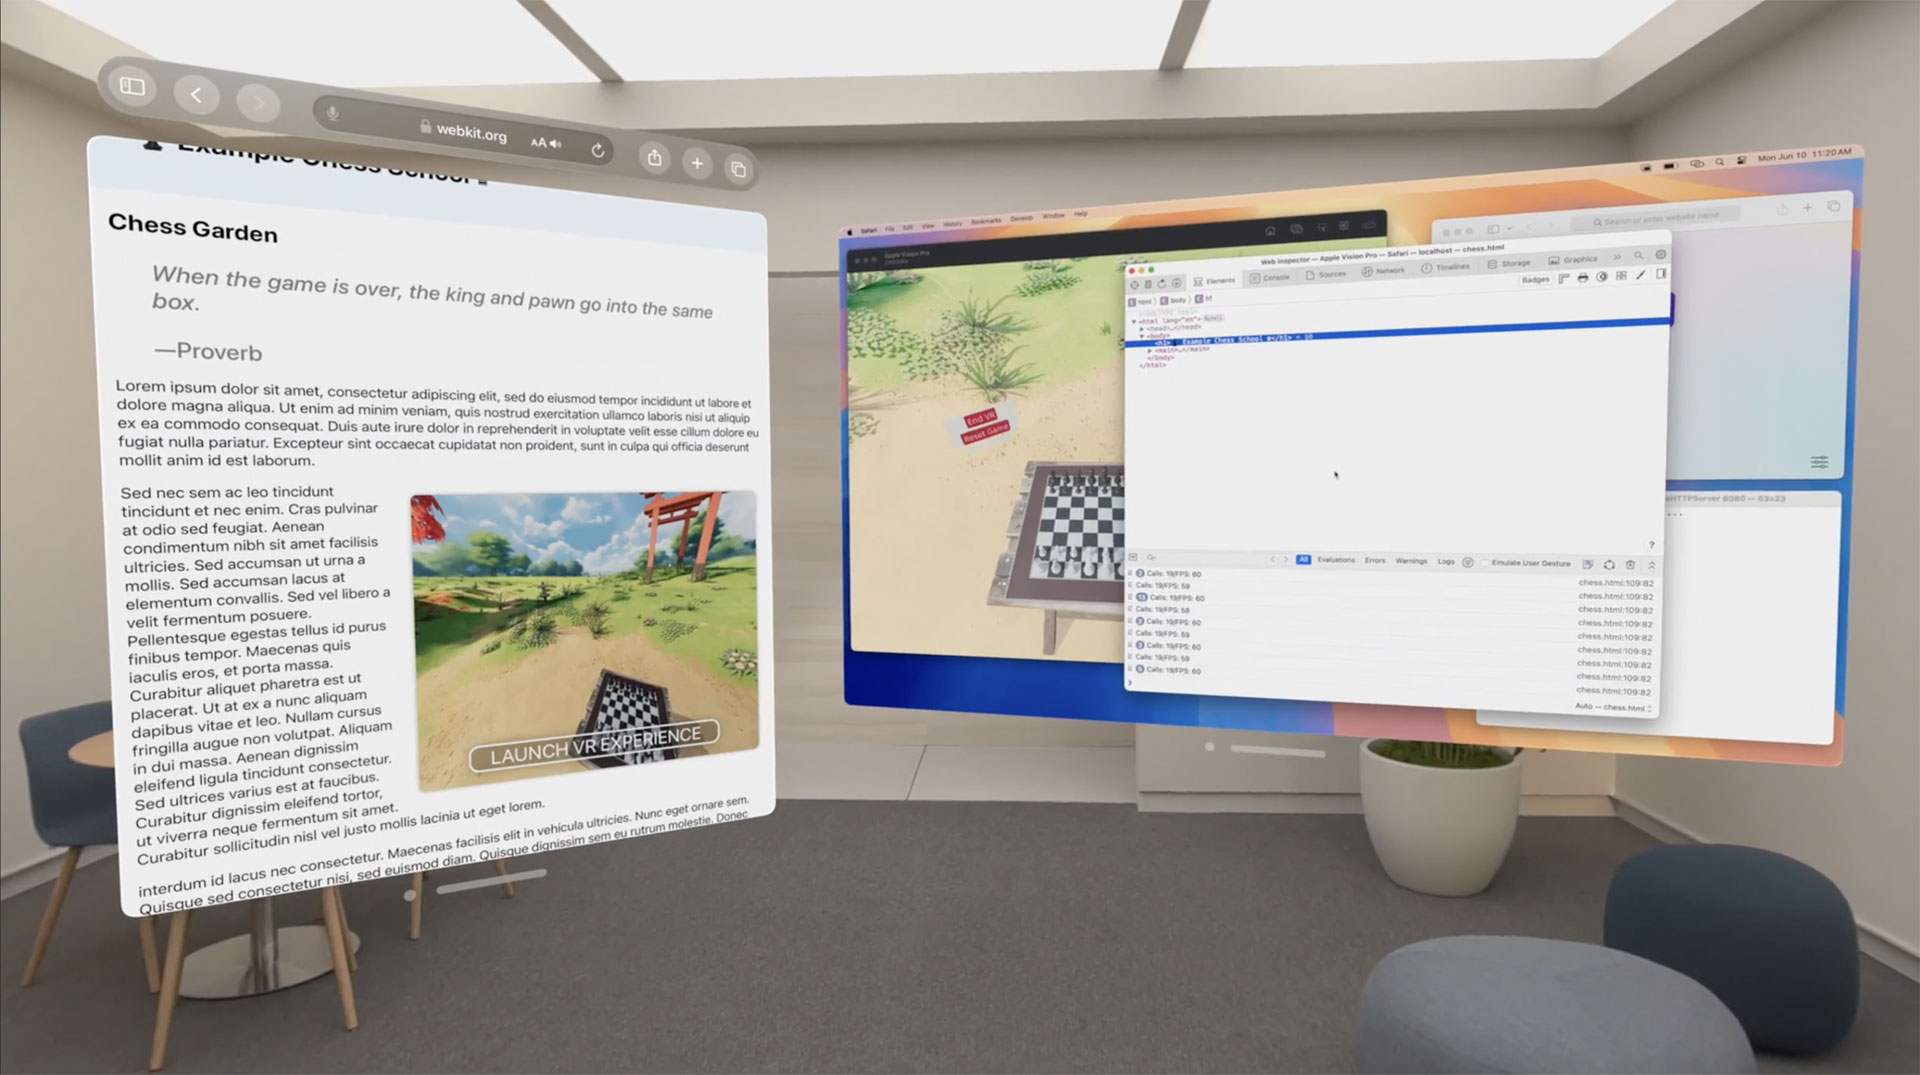 A view from inside Apple Vision Pro where two giant windows float in a real office. The first is a Safari window with the Chess Garden website showing. The second is macOS, with multiple windows inside the Mac window — working on developing the Chess Garden website using Web Inspector and more.